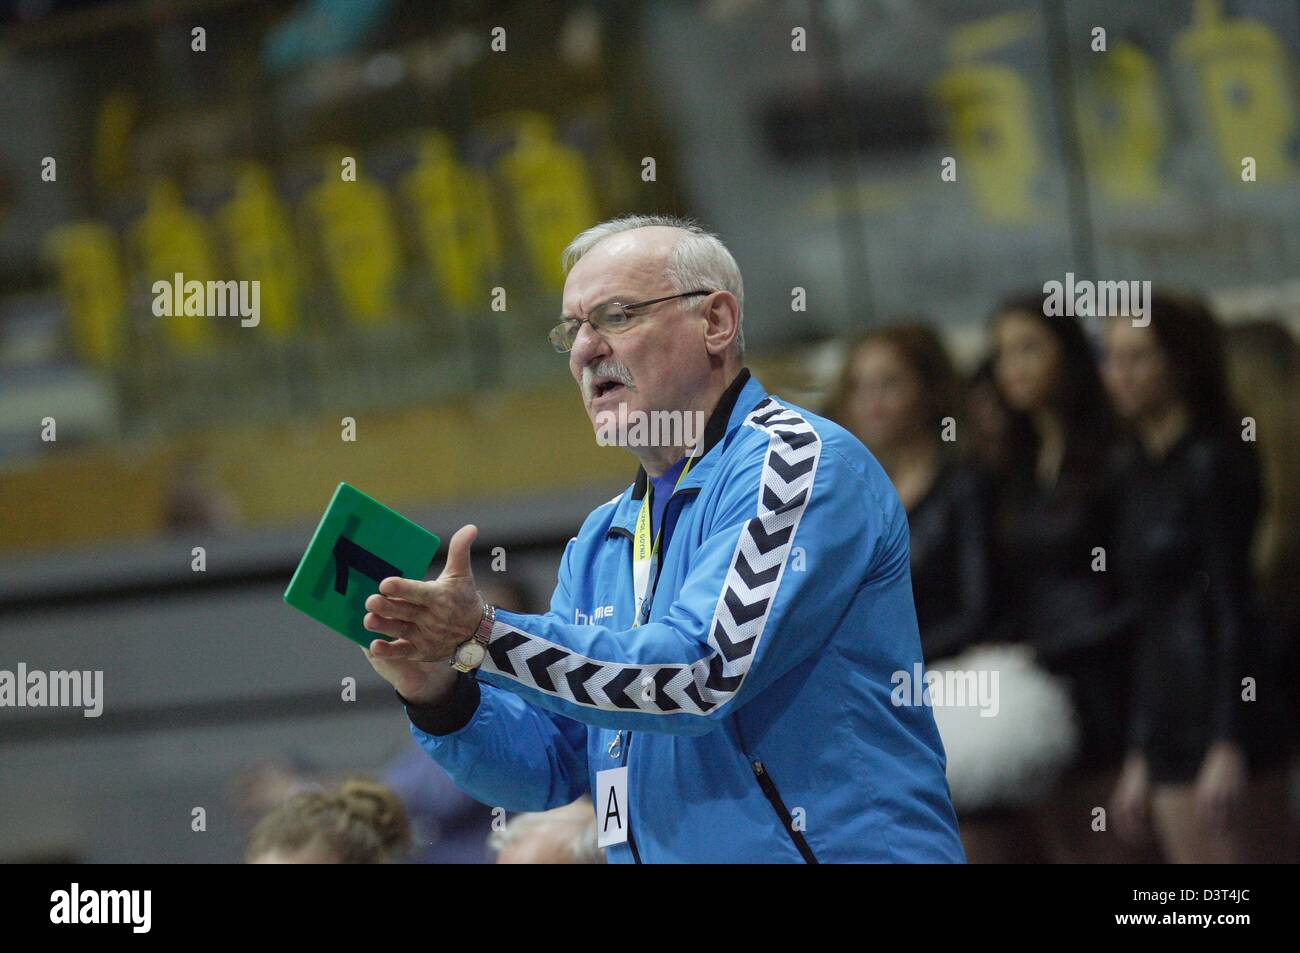 Poland 24th, February 2013 Handball: Final Four of the PGNiG Polish Cup. Vistal Laczpol Gdynia v KPR Ruch Chorzow game for 3th place in the Cup at HSW sports hall in Gdynia. Janusz Szymczyk - KPR team head coach   during the game Stock Photo